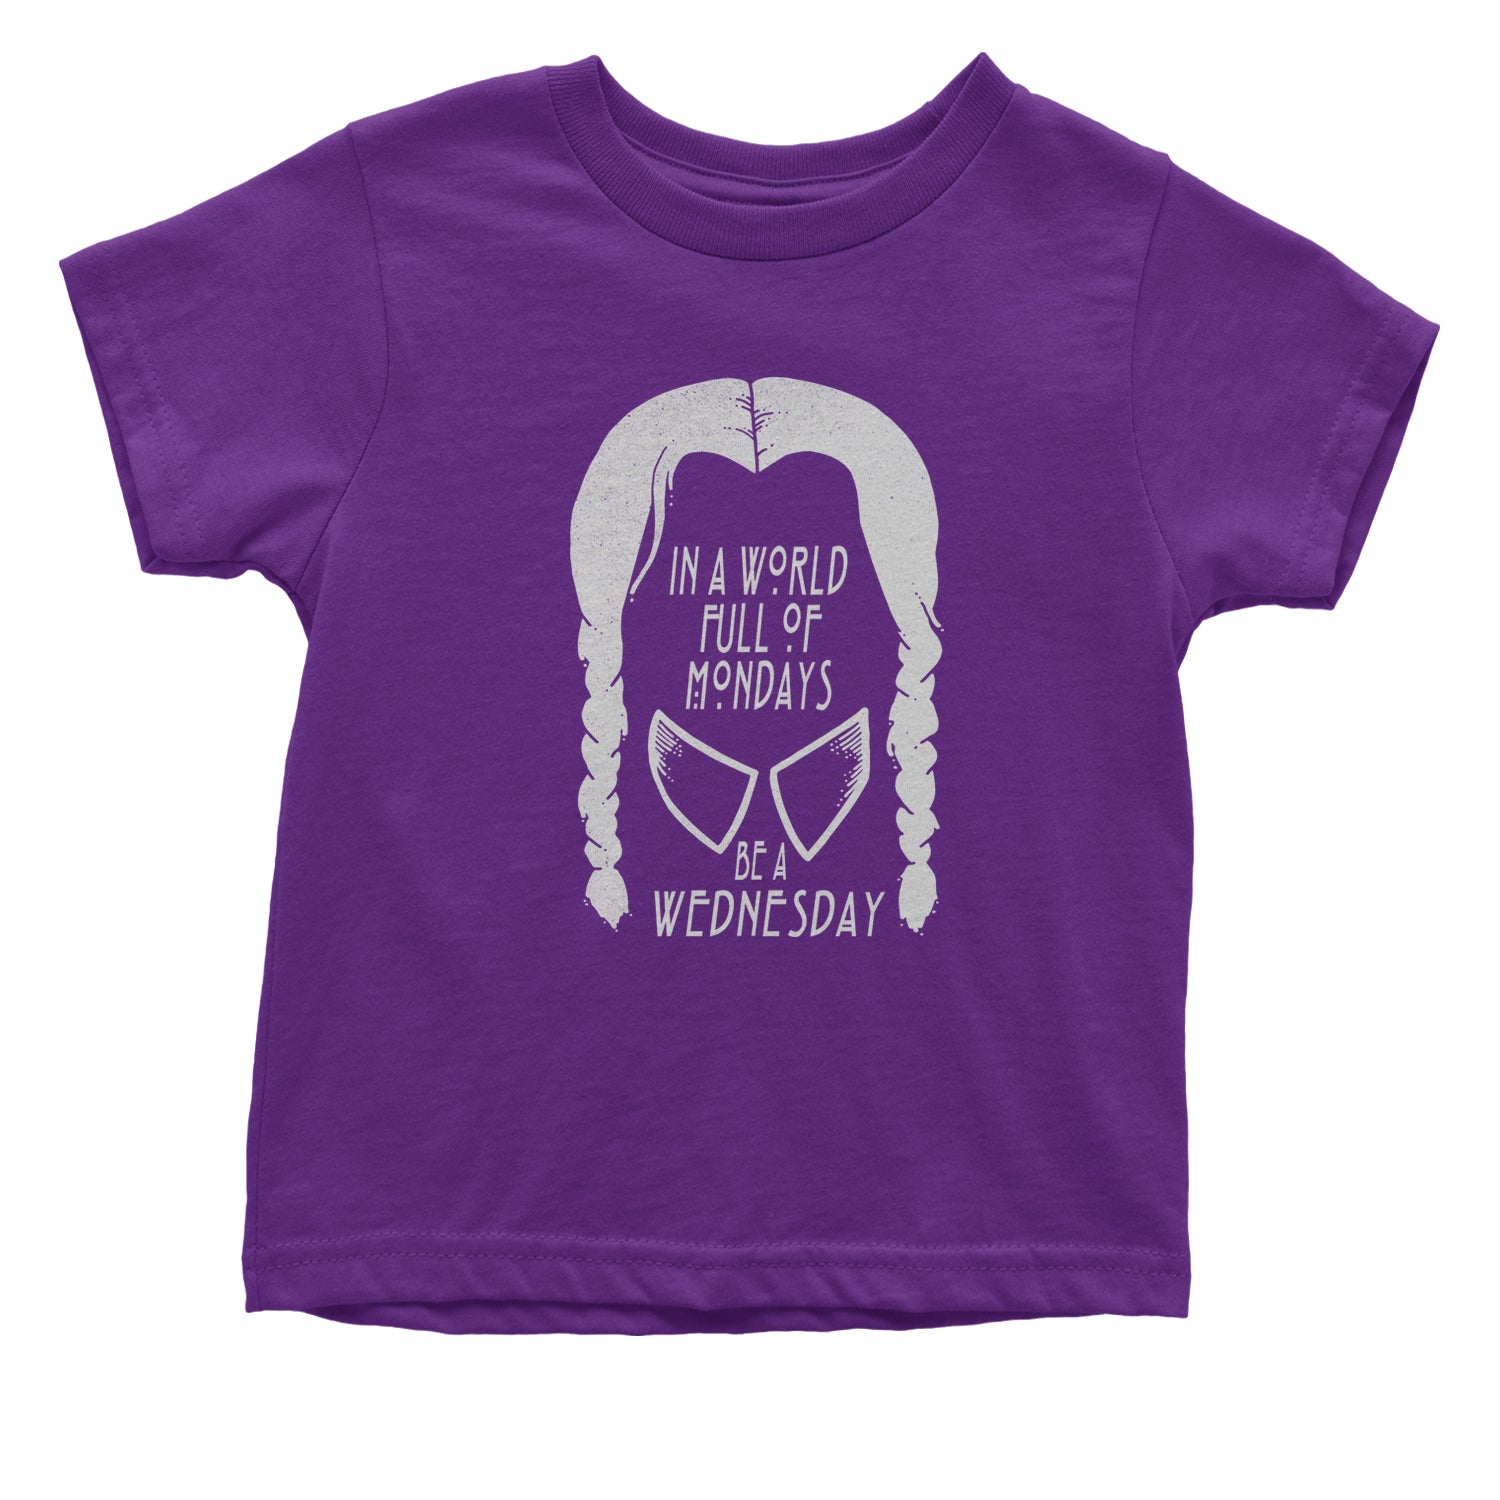 In A World Full Of Mondays, Be A Wednesday Infant One-Piece Romper Bodysuit and Toddler T-shirt academy, jericho, more, never, nevermore, vermont, Wednesday by Expression Tees